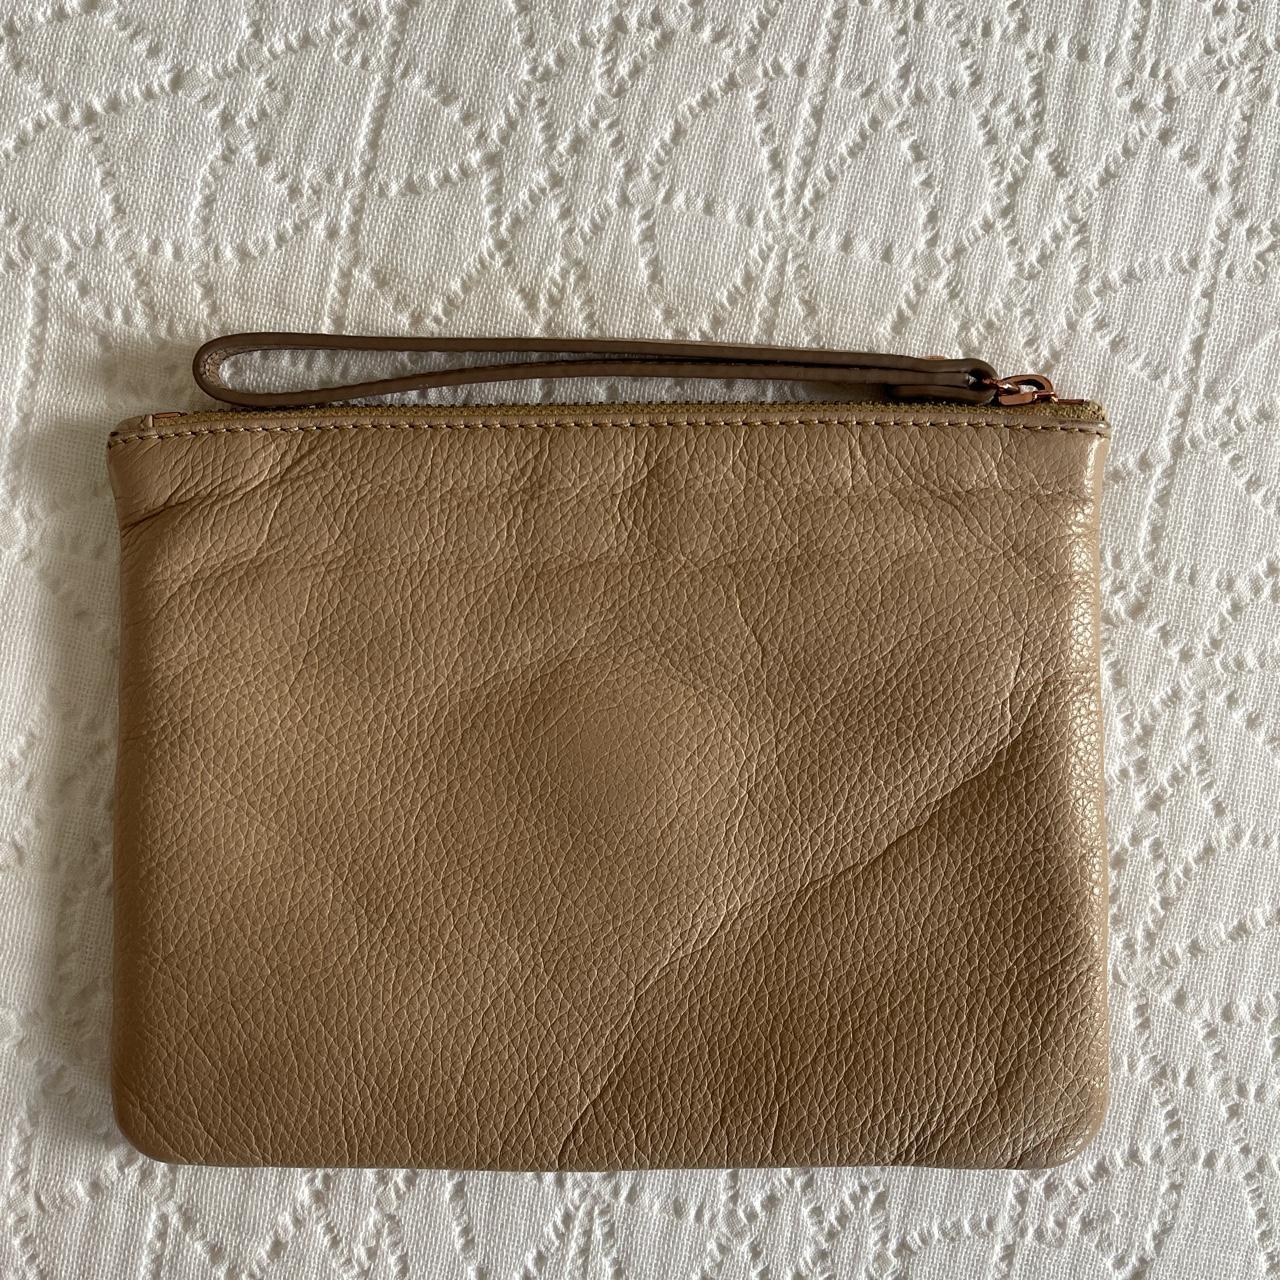 Mimco beige and rose gold clutch. Used, in fair... - Depop